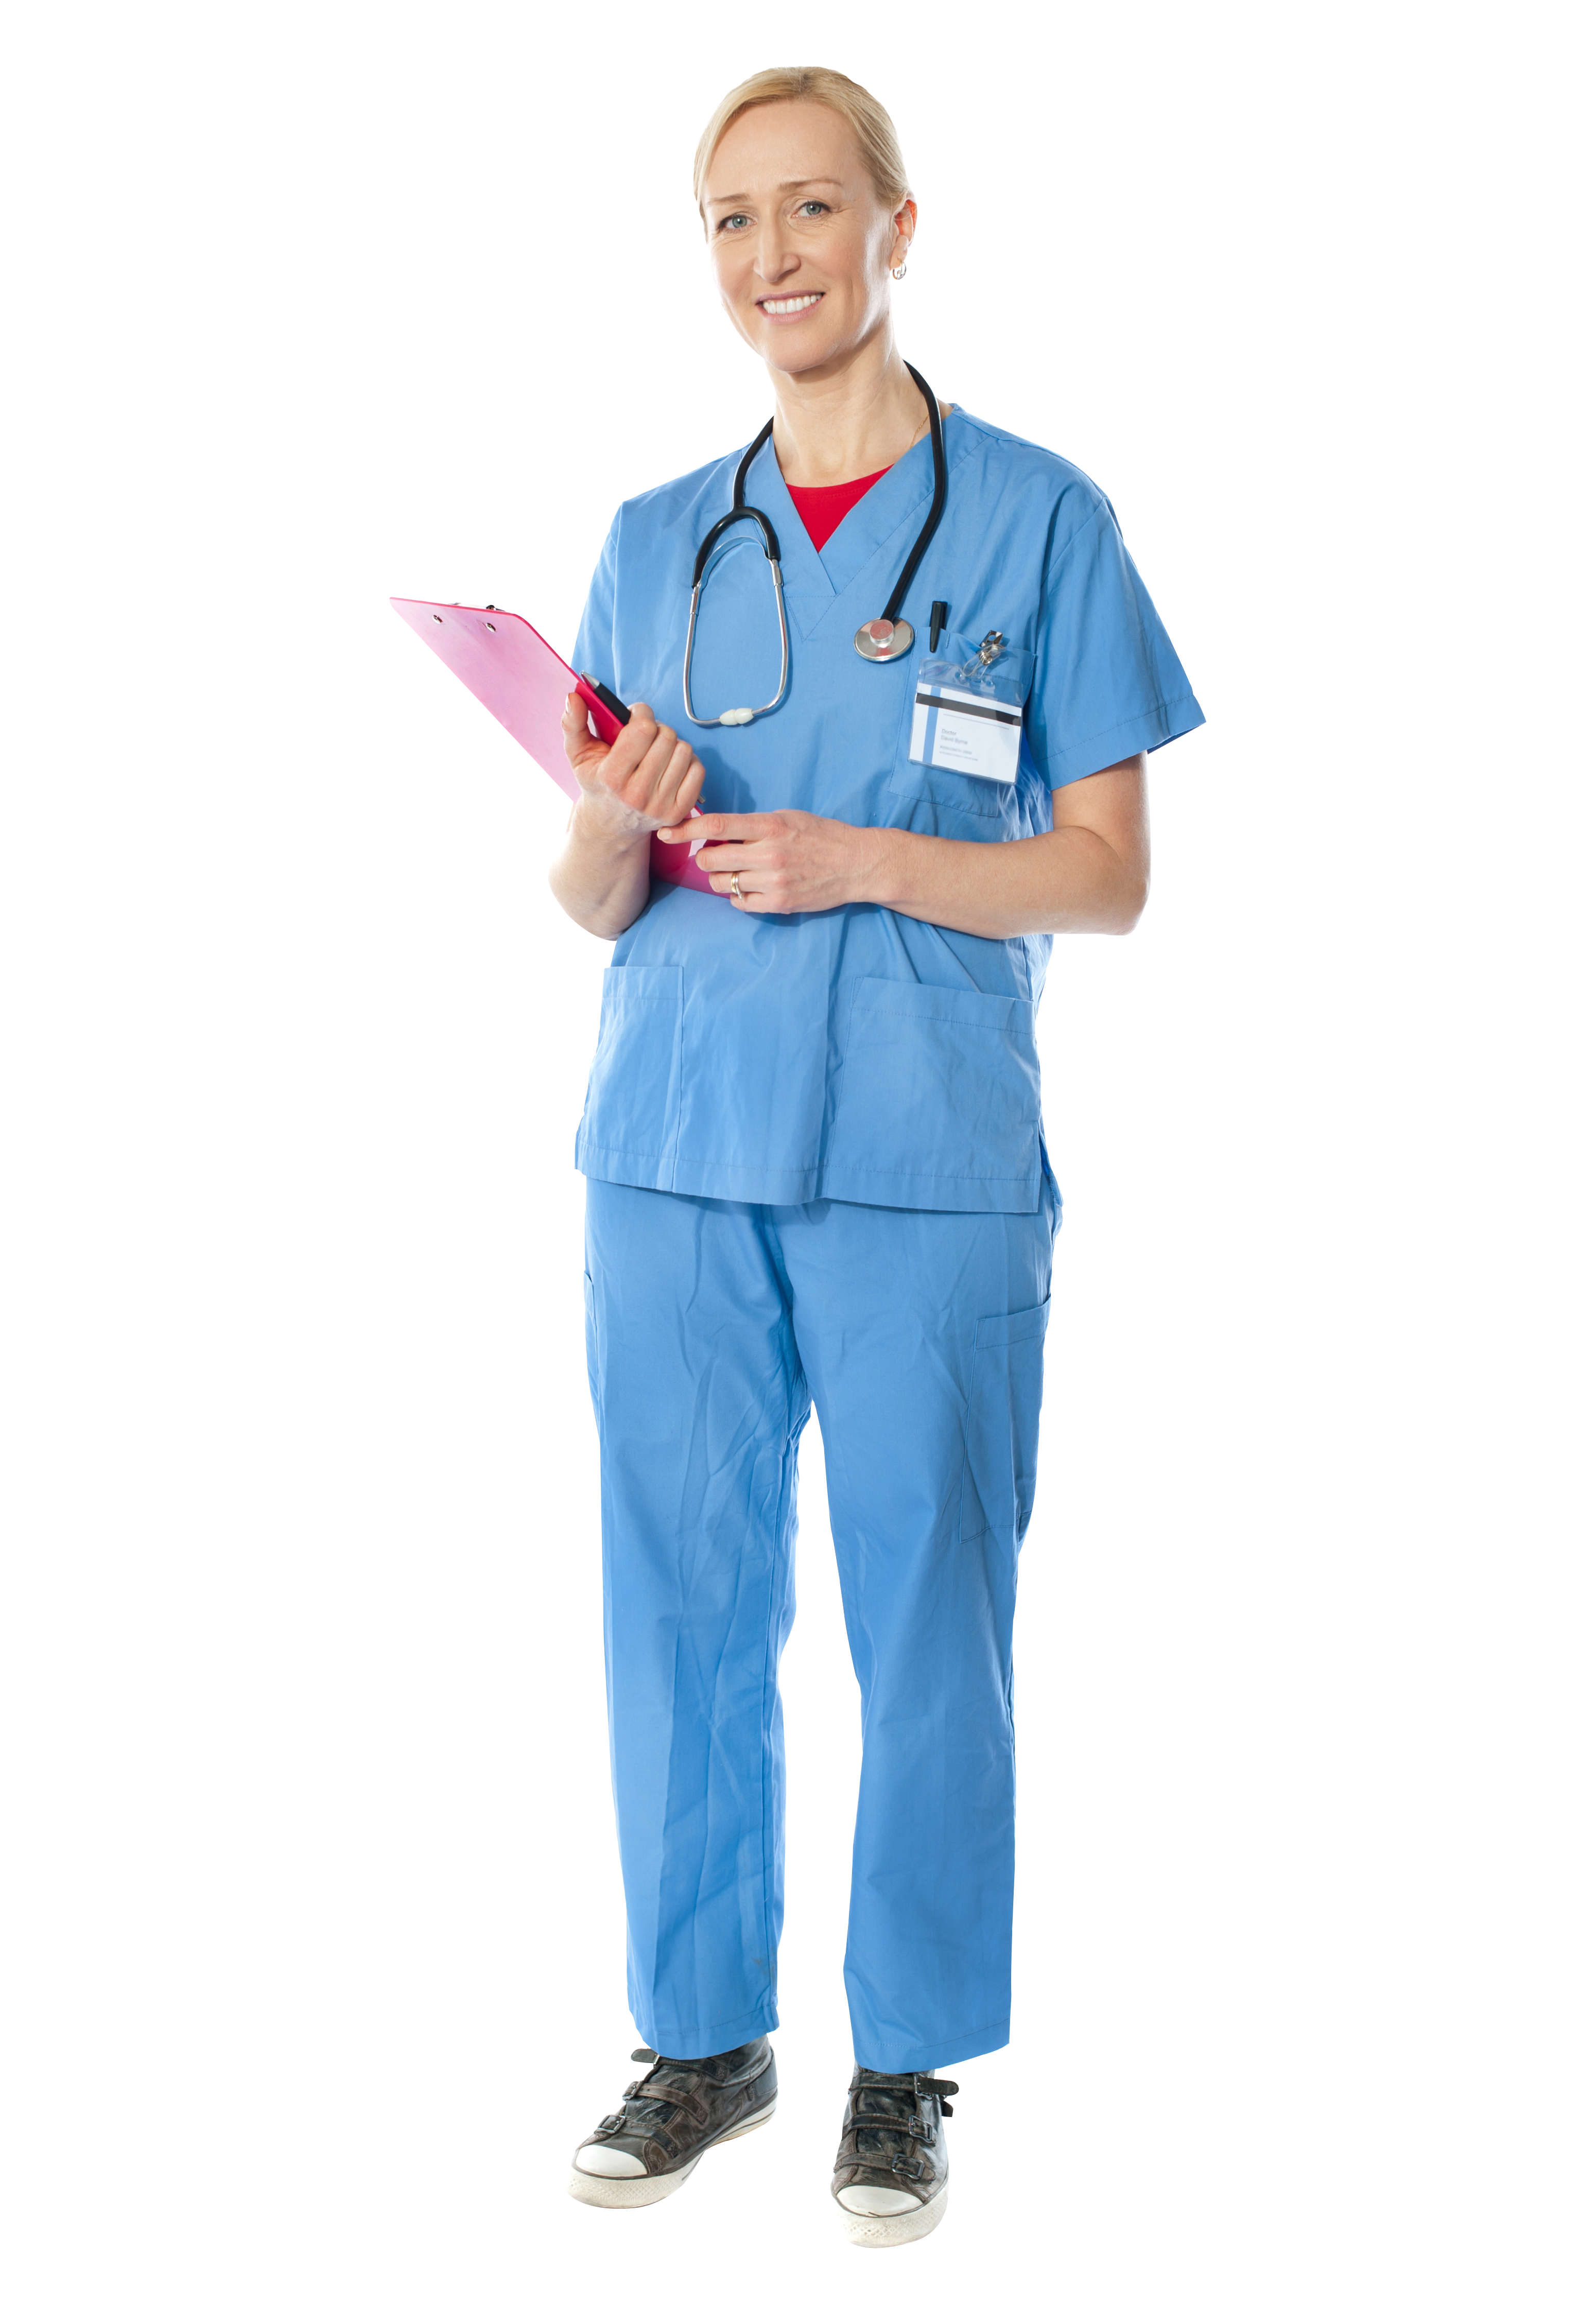 Female Doctor Png Image Purepng Free Transparent Cc0 Png Image Library